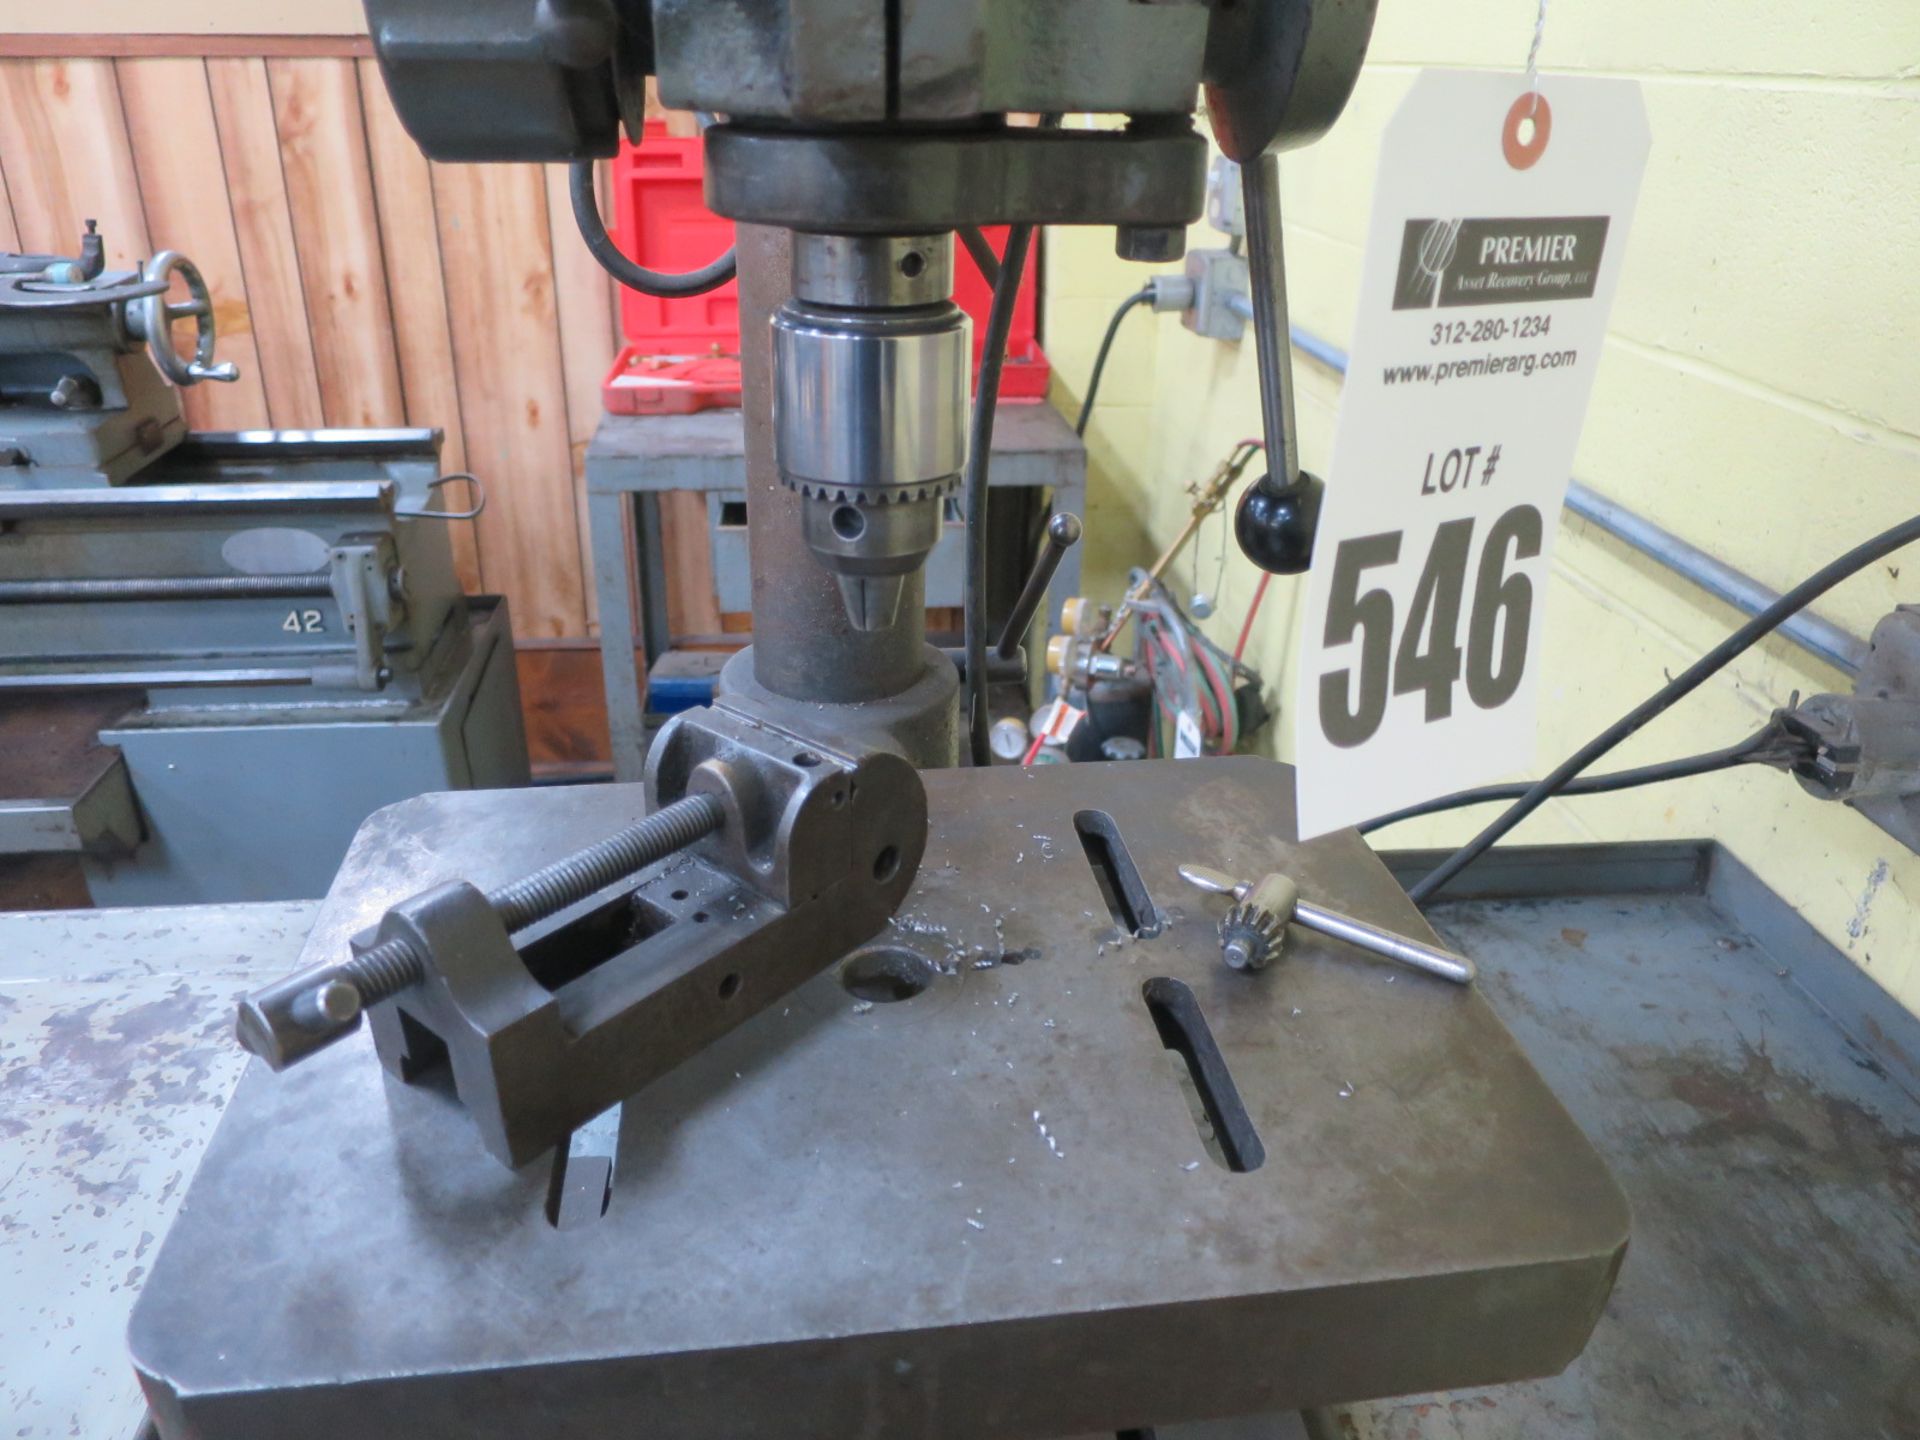 Clausing Series 16Vc 15" Variable Speed Drill Press, Sn 506266 With Jacobs Chuck and vice - Image 3 of 3